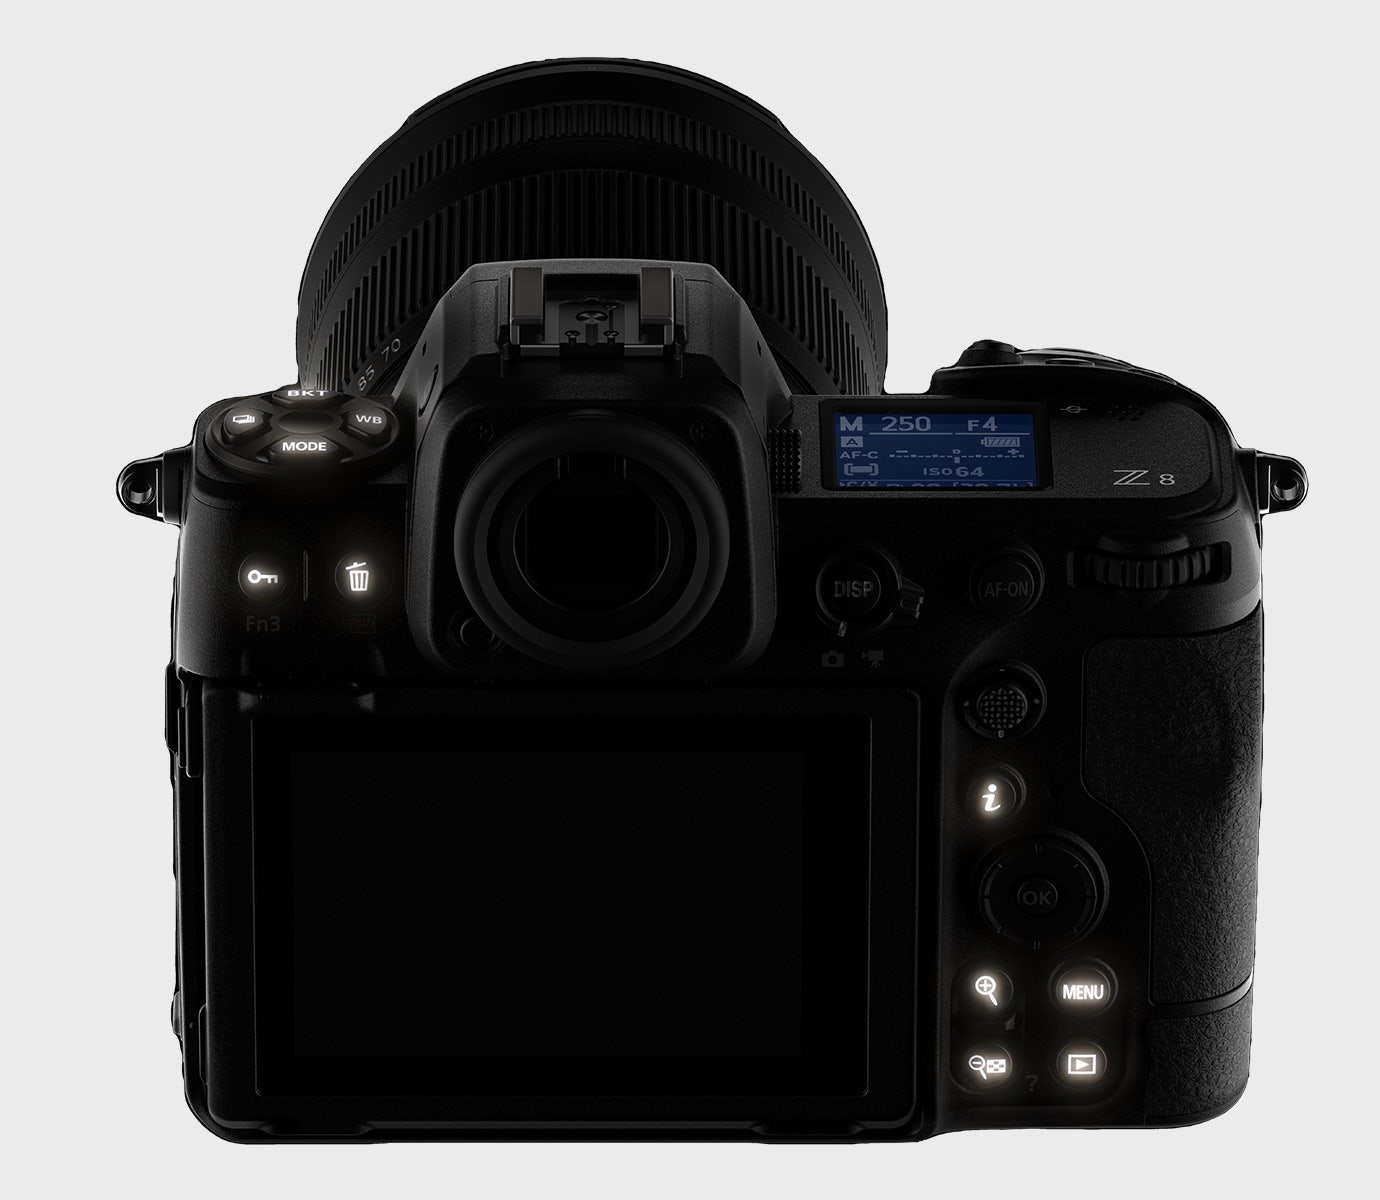 Nikon Z 8 Mirrorless Camera with Backlit Buttons | Nikon Cameras, Lenses & Accessories